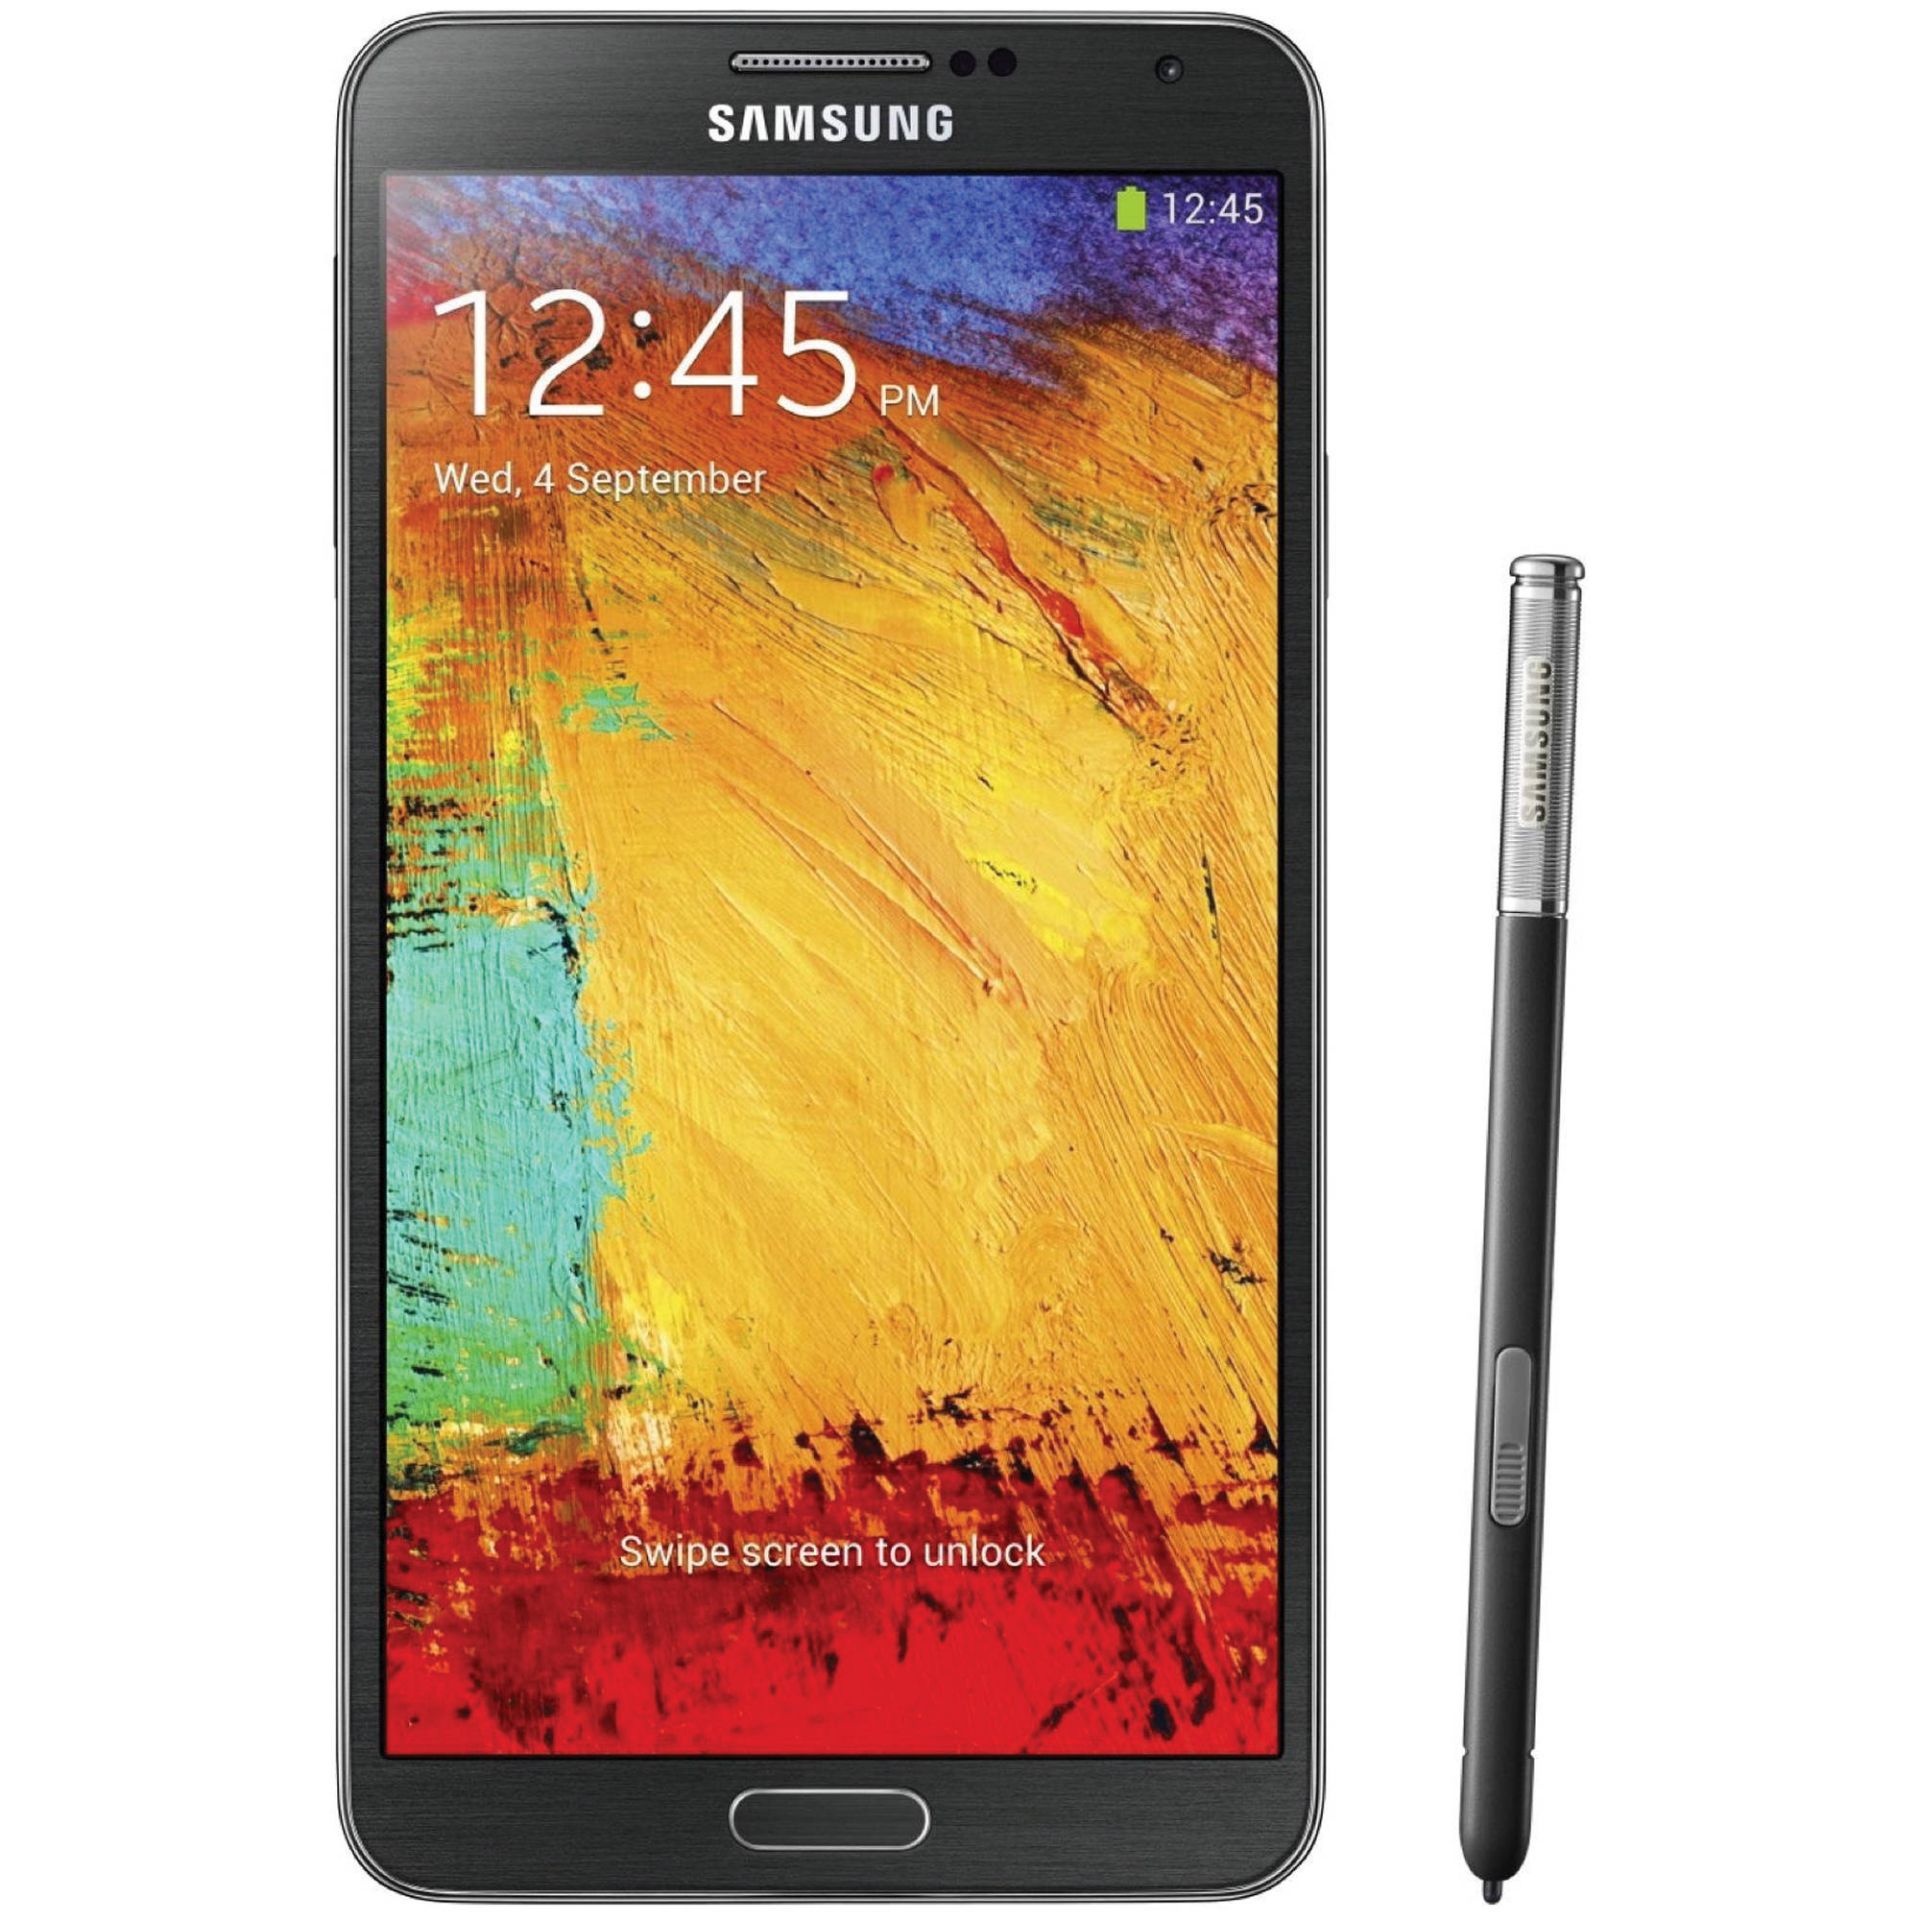 Grade A Samsung Note3 ( N900A/T/V/P ) Colours May Vary Item available approx 12 working days after